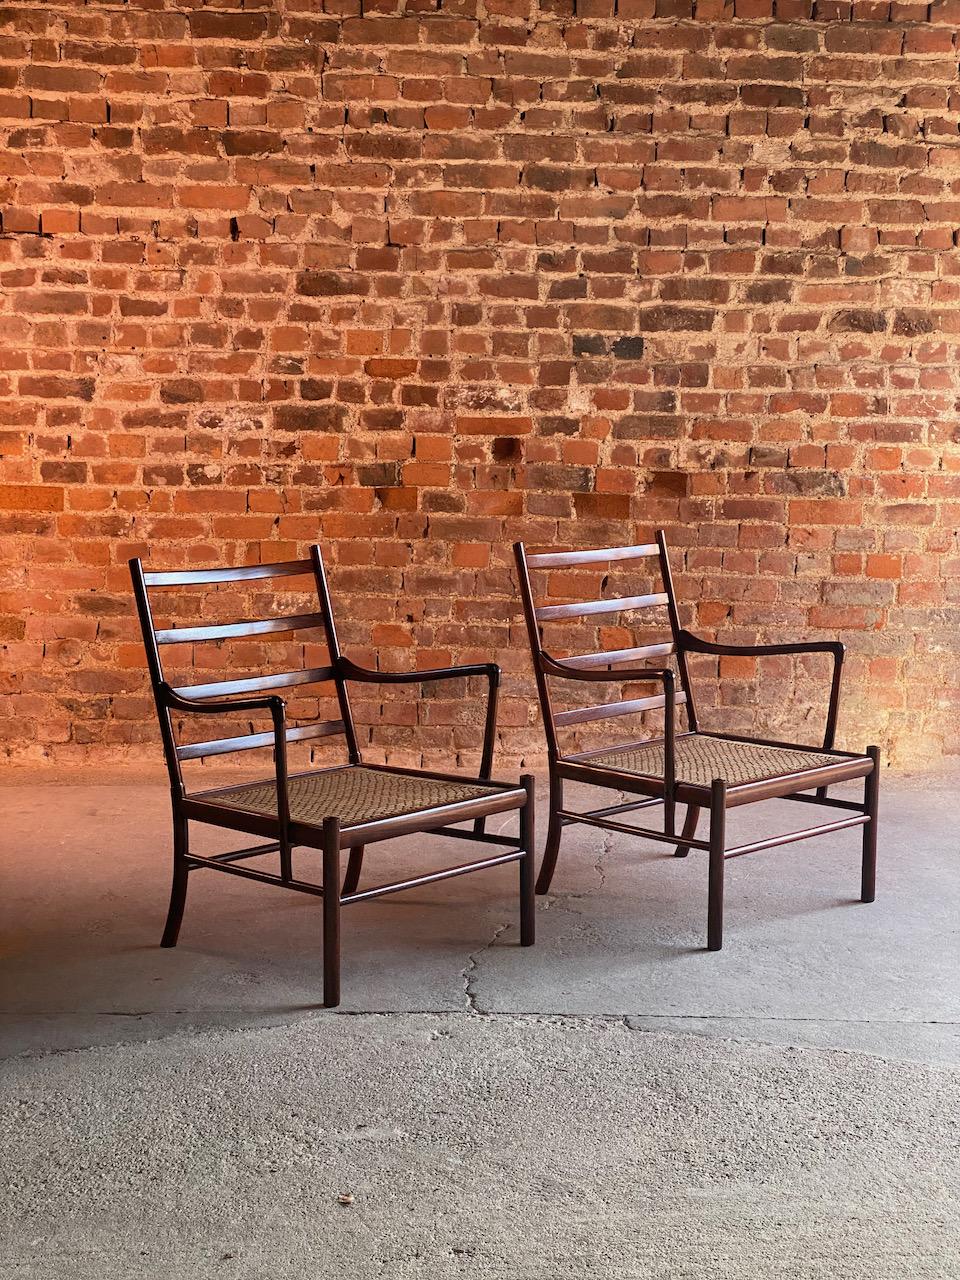 Leather Ole Wanscher Model 149 Rosewood Colonial Chairs Pair by Poul Jeppesens, Denmark